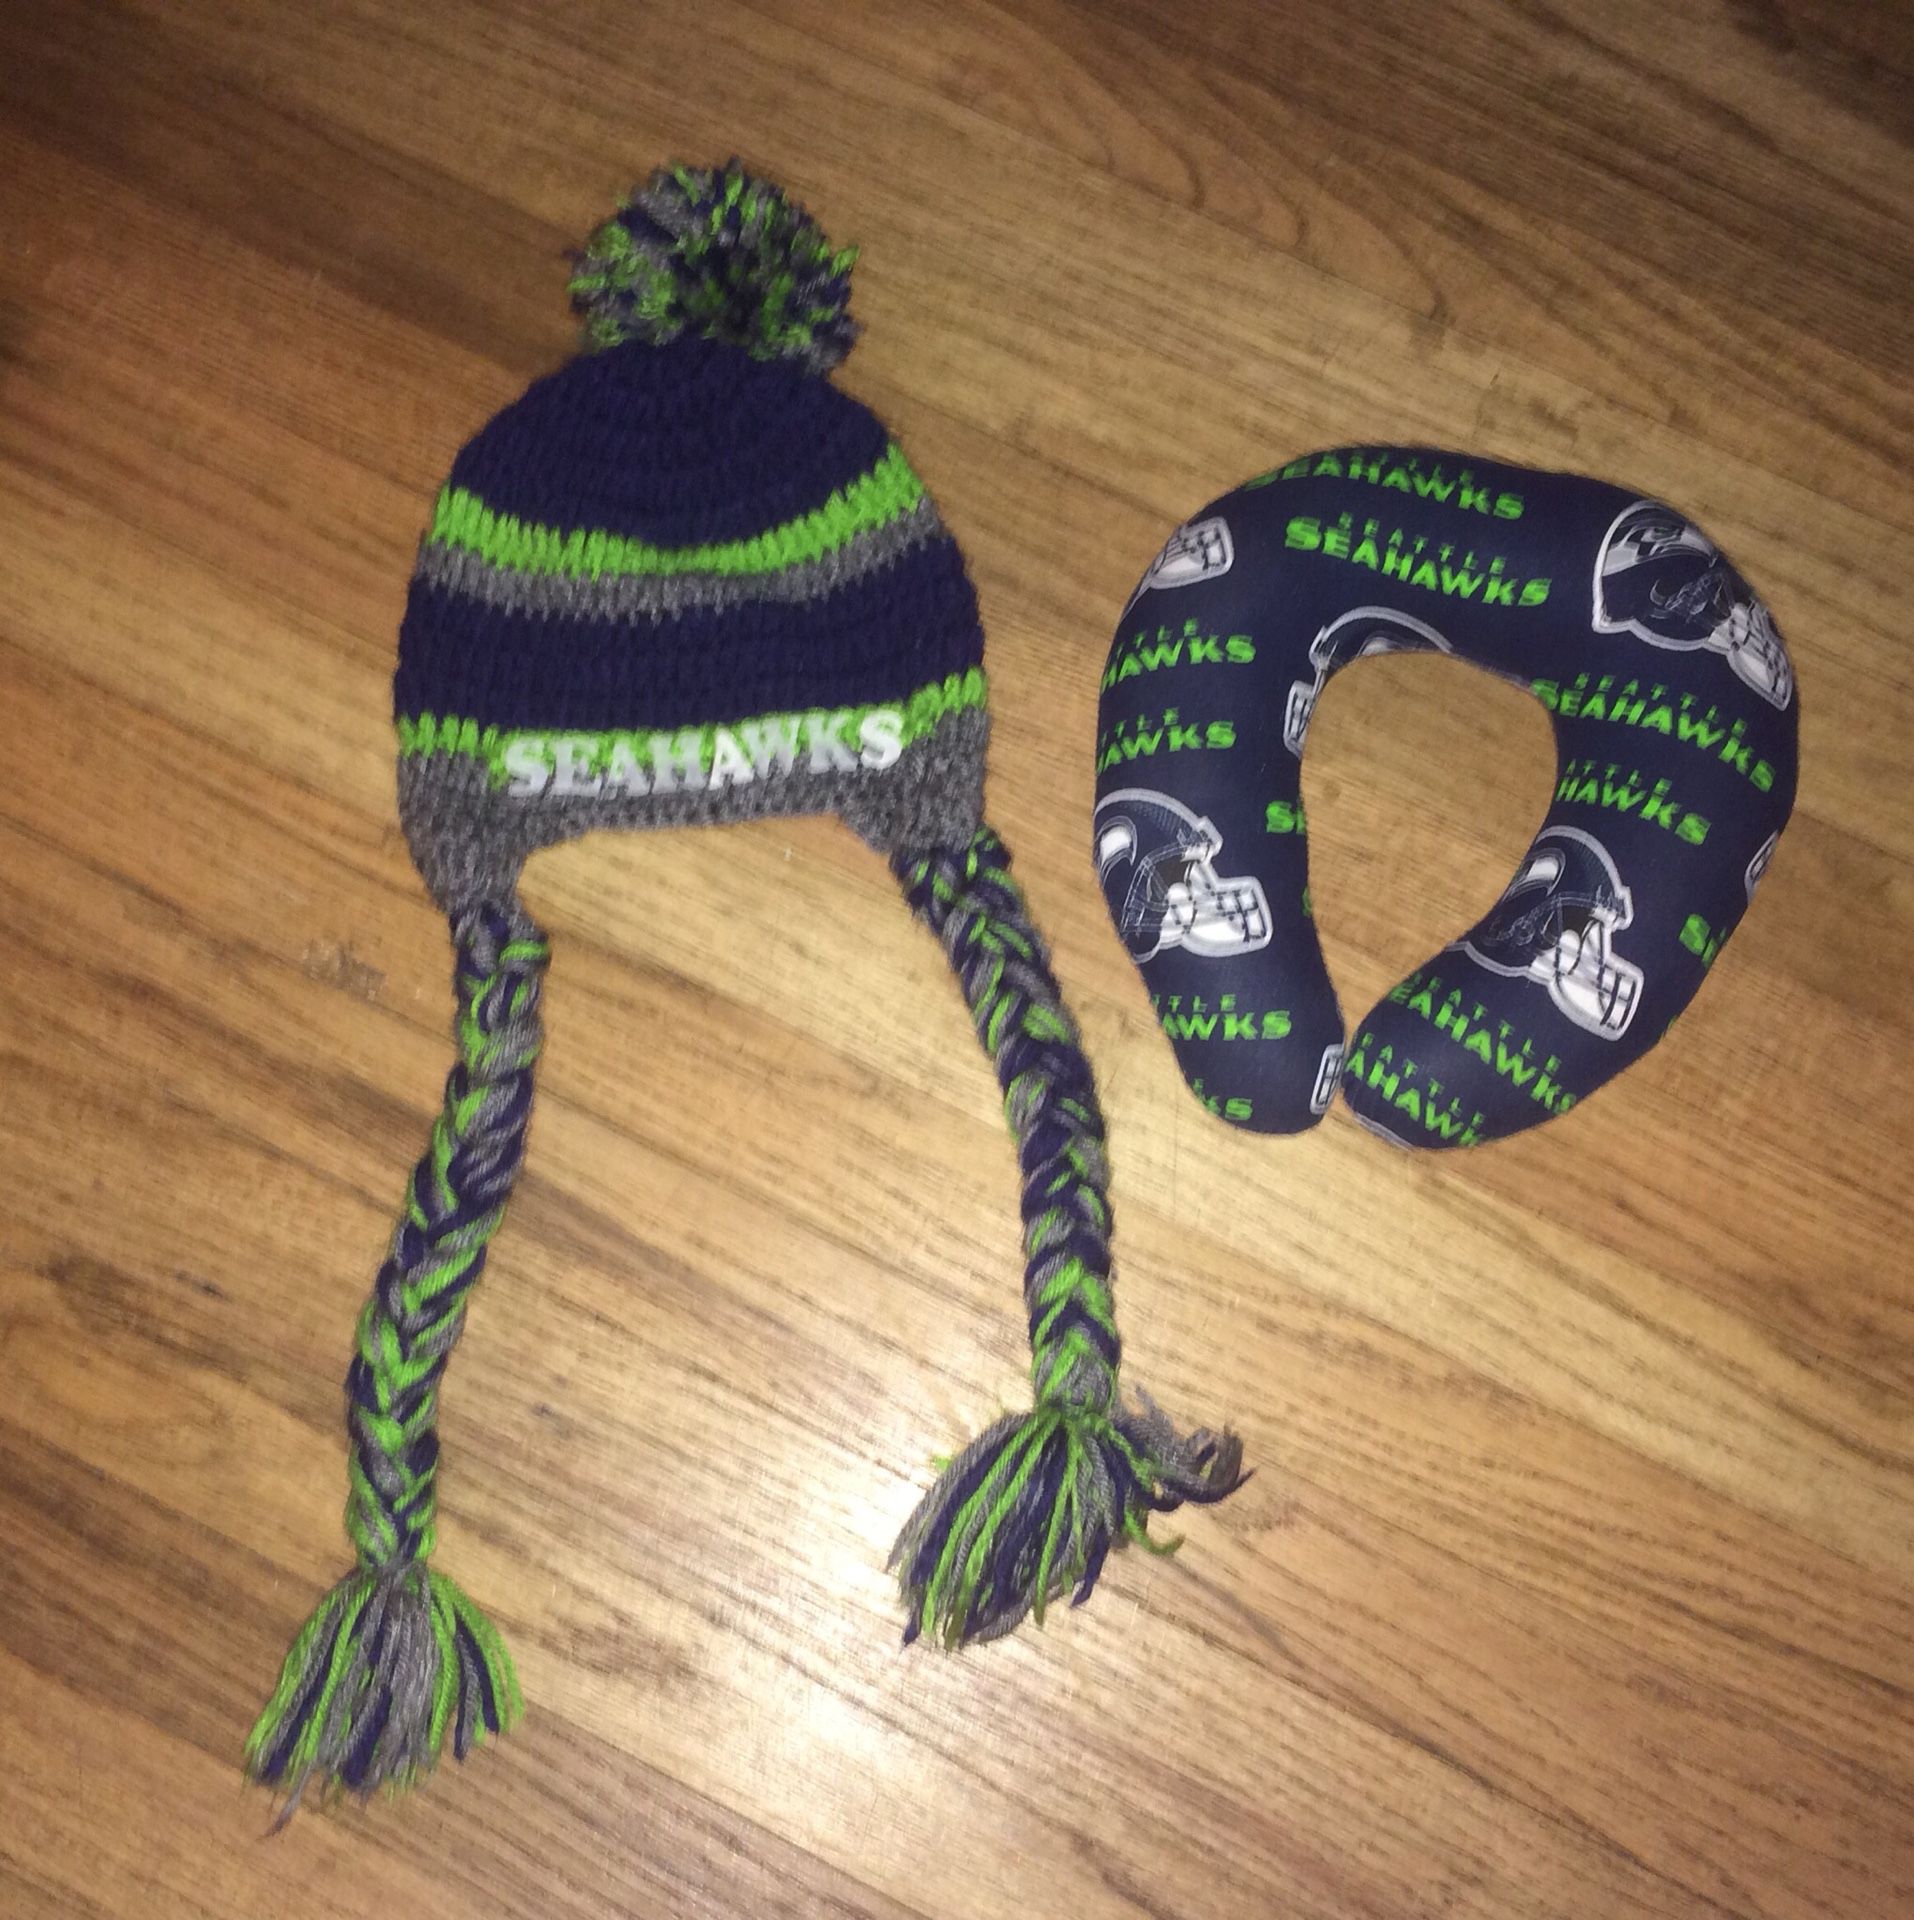 Crochet winter hat and neck pillow Seahawks